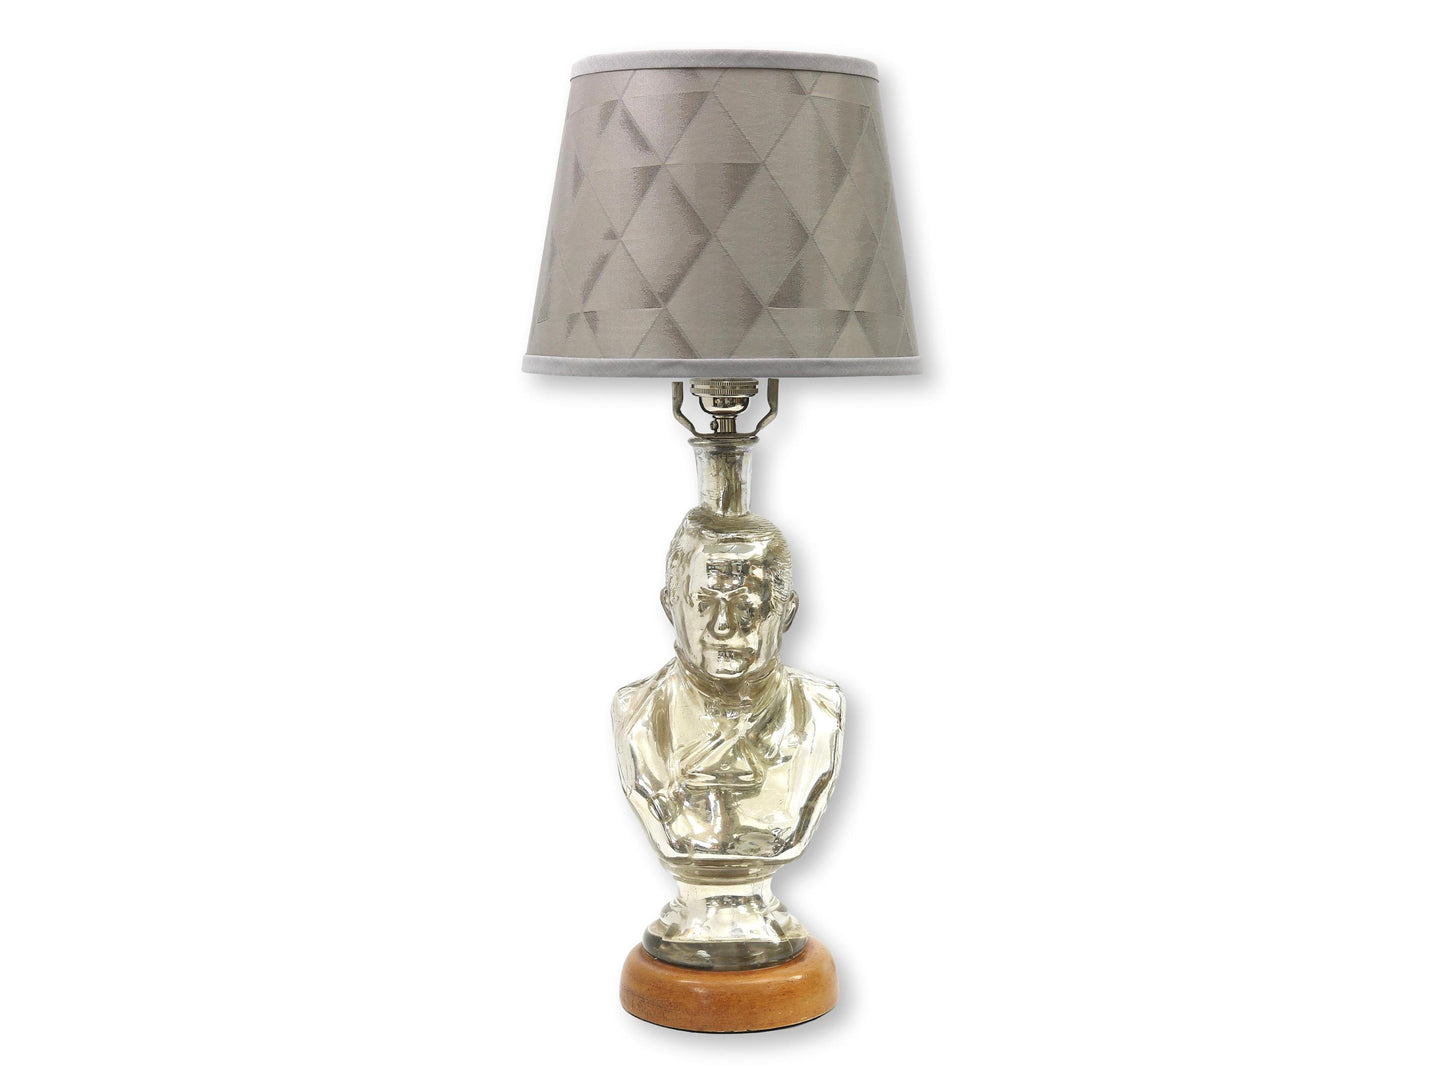 19th-C. Mercury Glass Adolphe Thiers Bust Desk Lamp